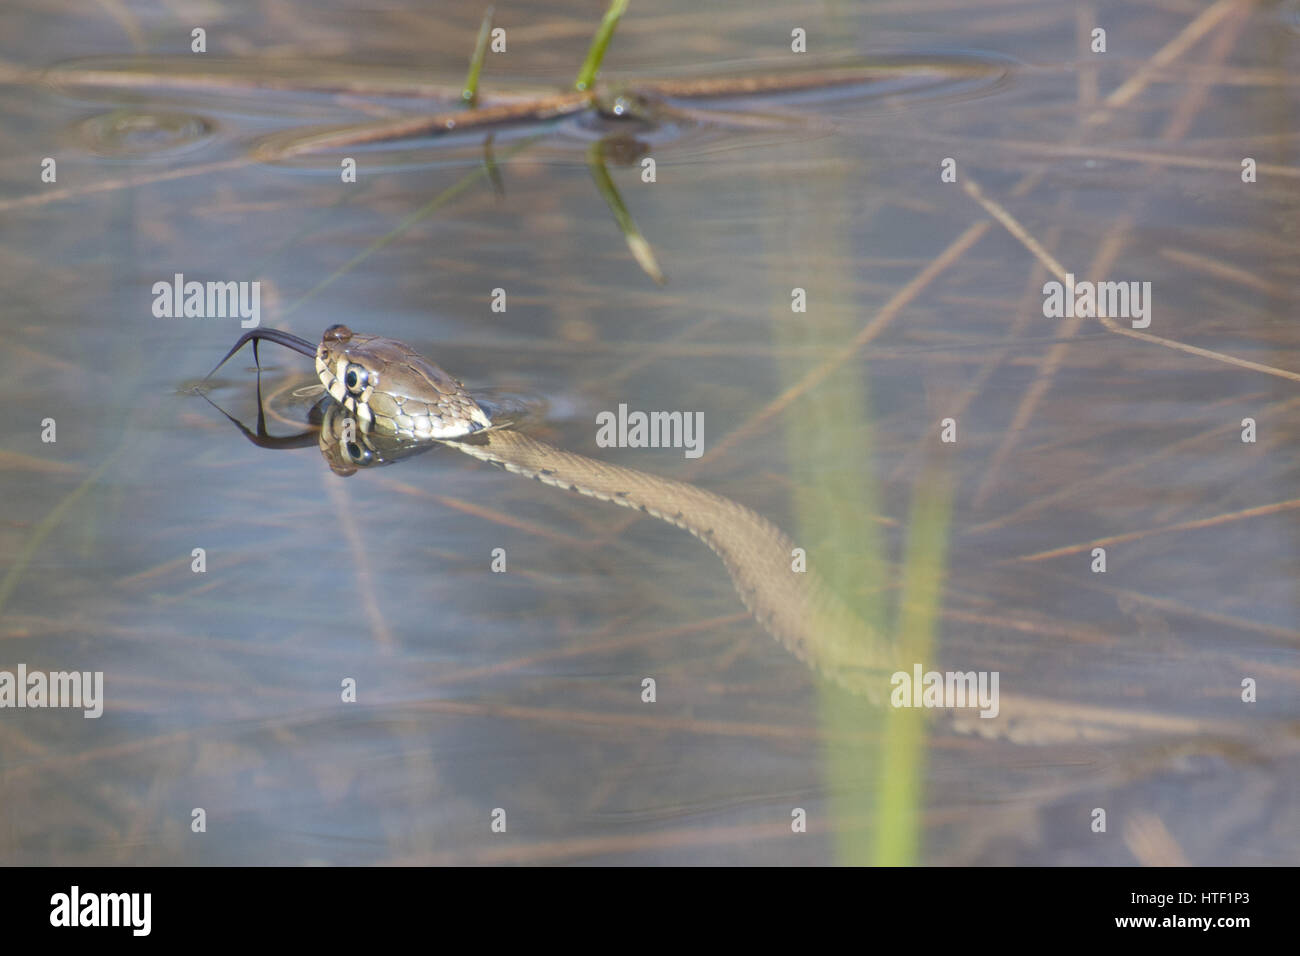 Grass snake (Natrix helvetica) swimming in a pond with tongue flicking (chemosensing) Stock Photo